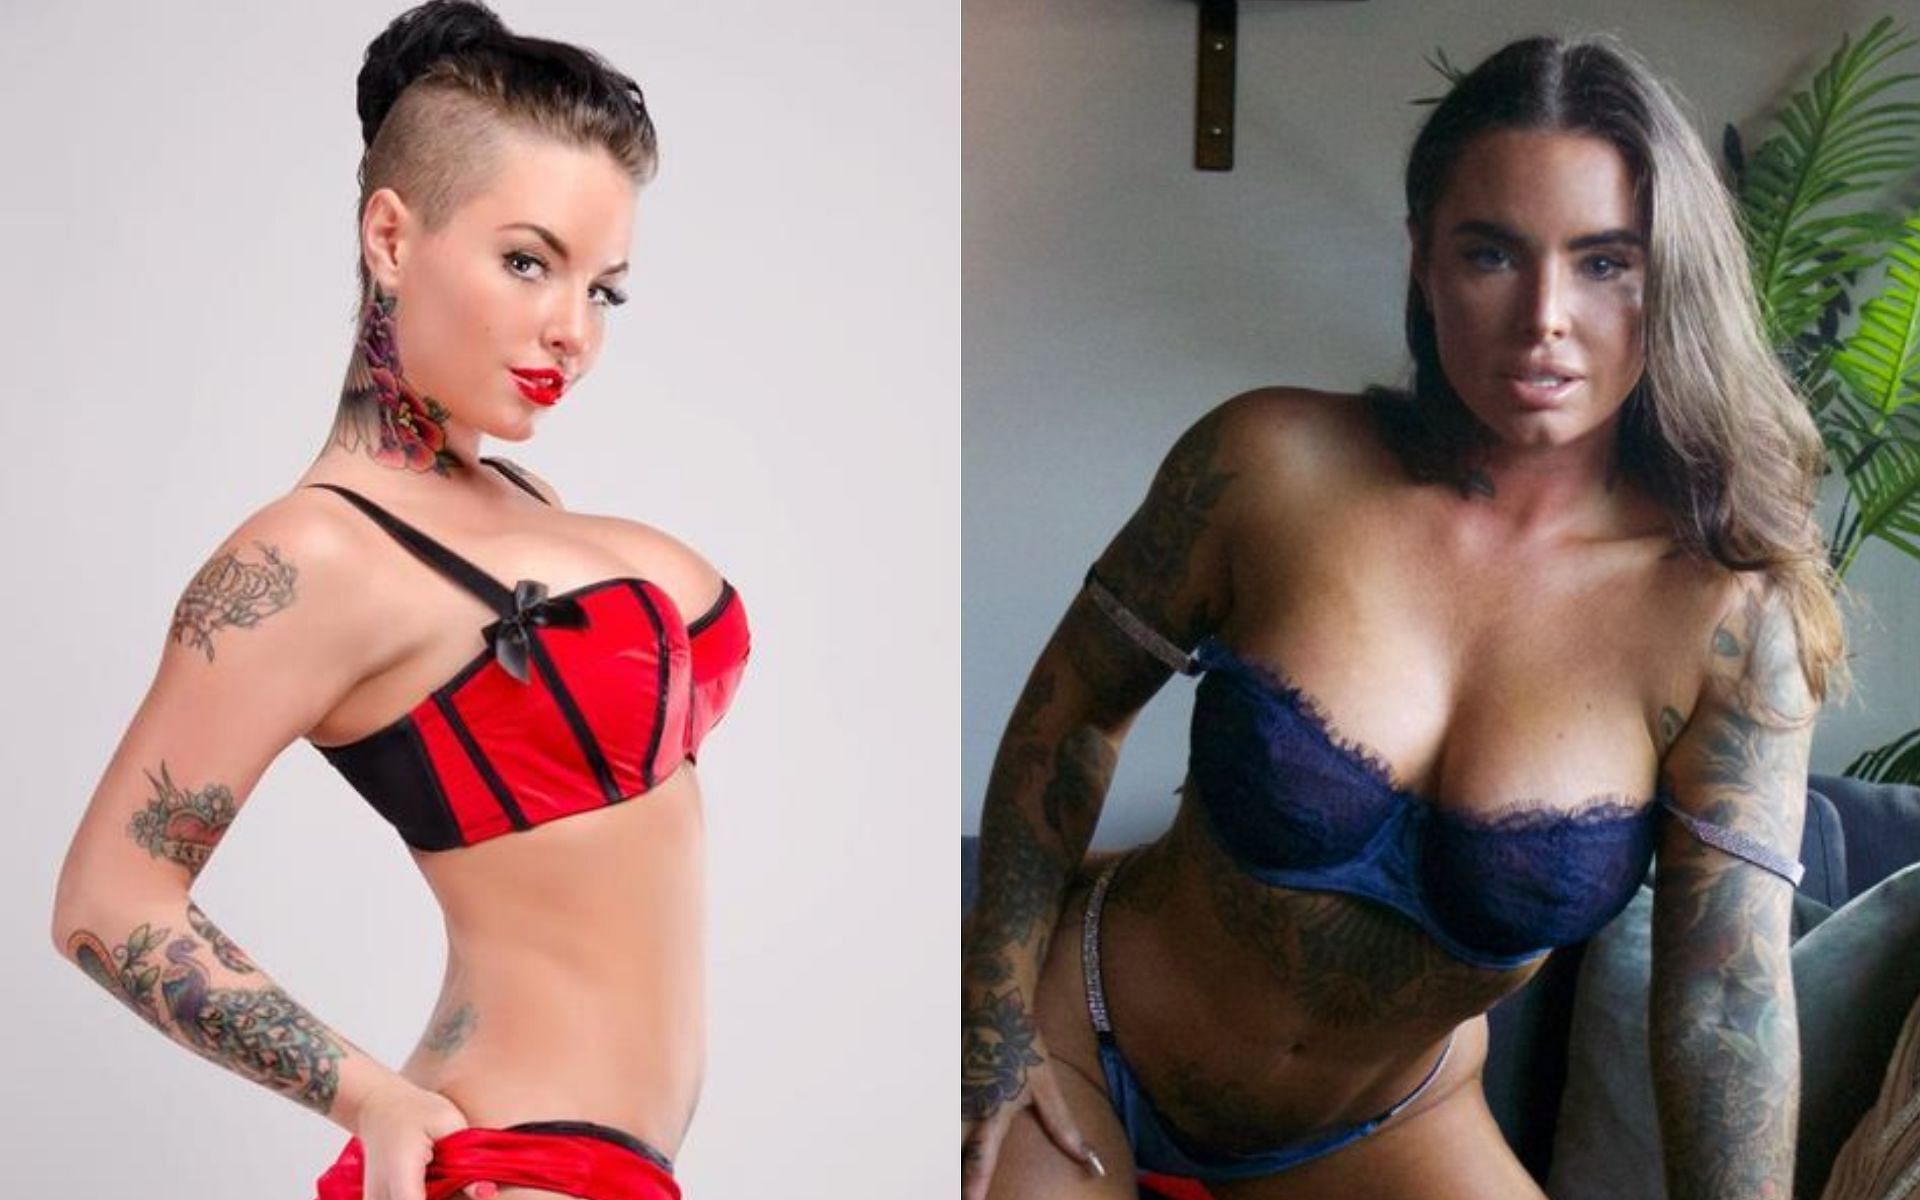 Adult star Christy Mack before and after her injuries [Image Credit: @christymack on Twitter]